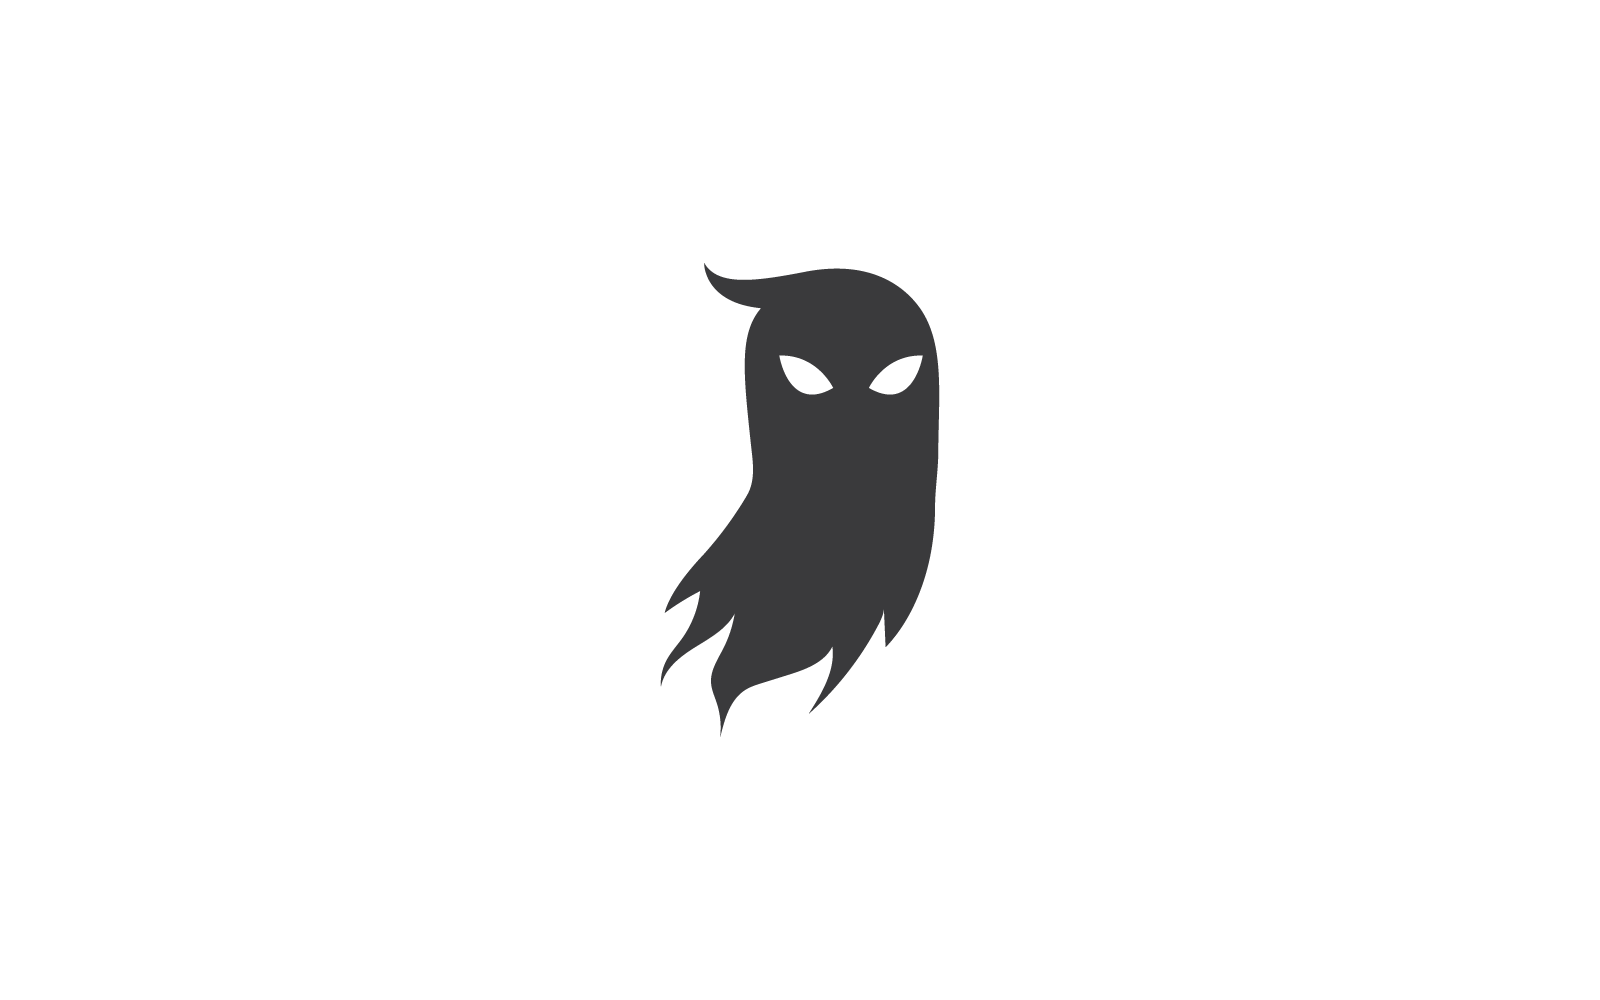 Black Ghost ilustration vector icon template